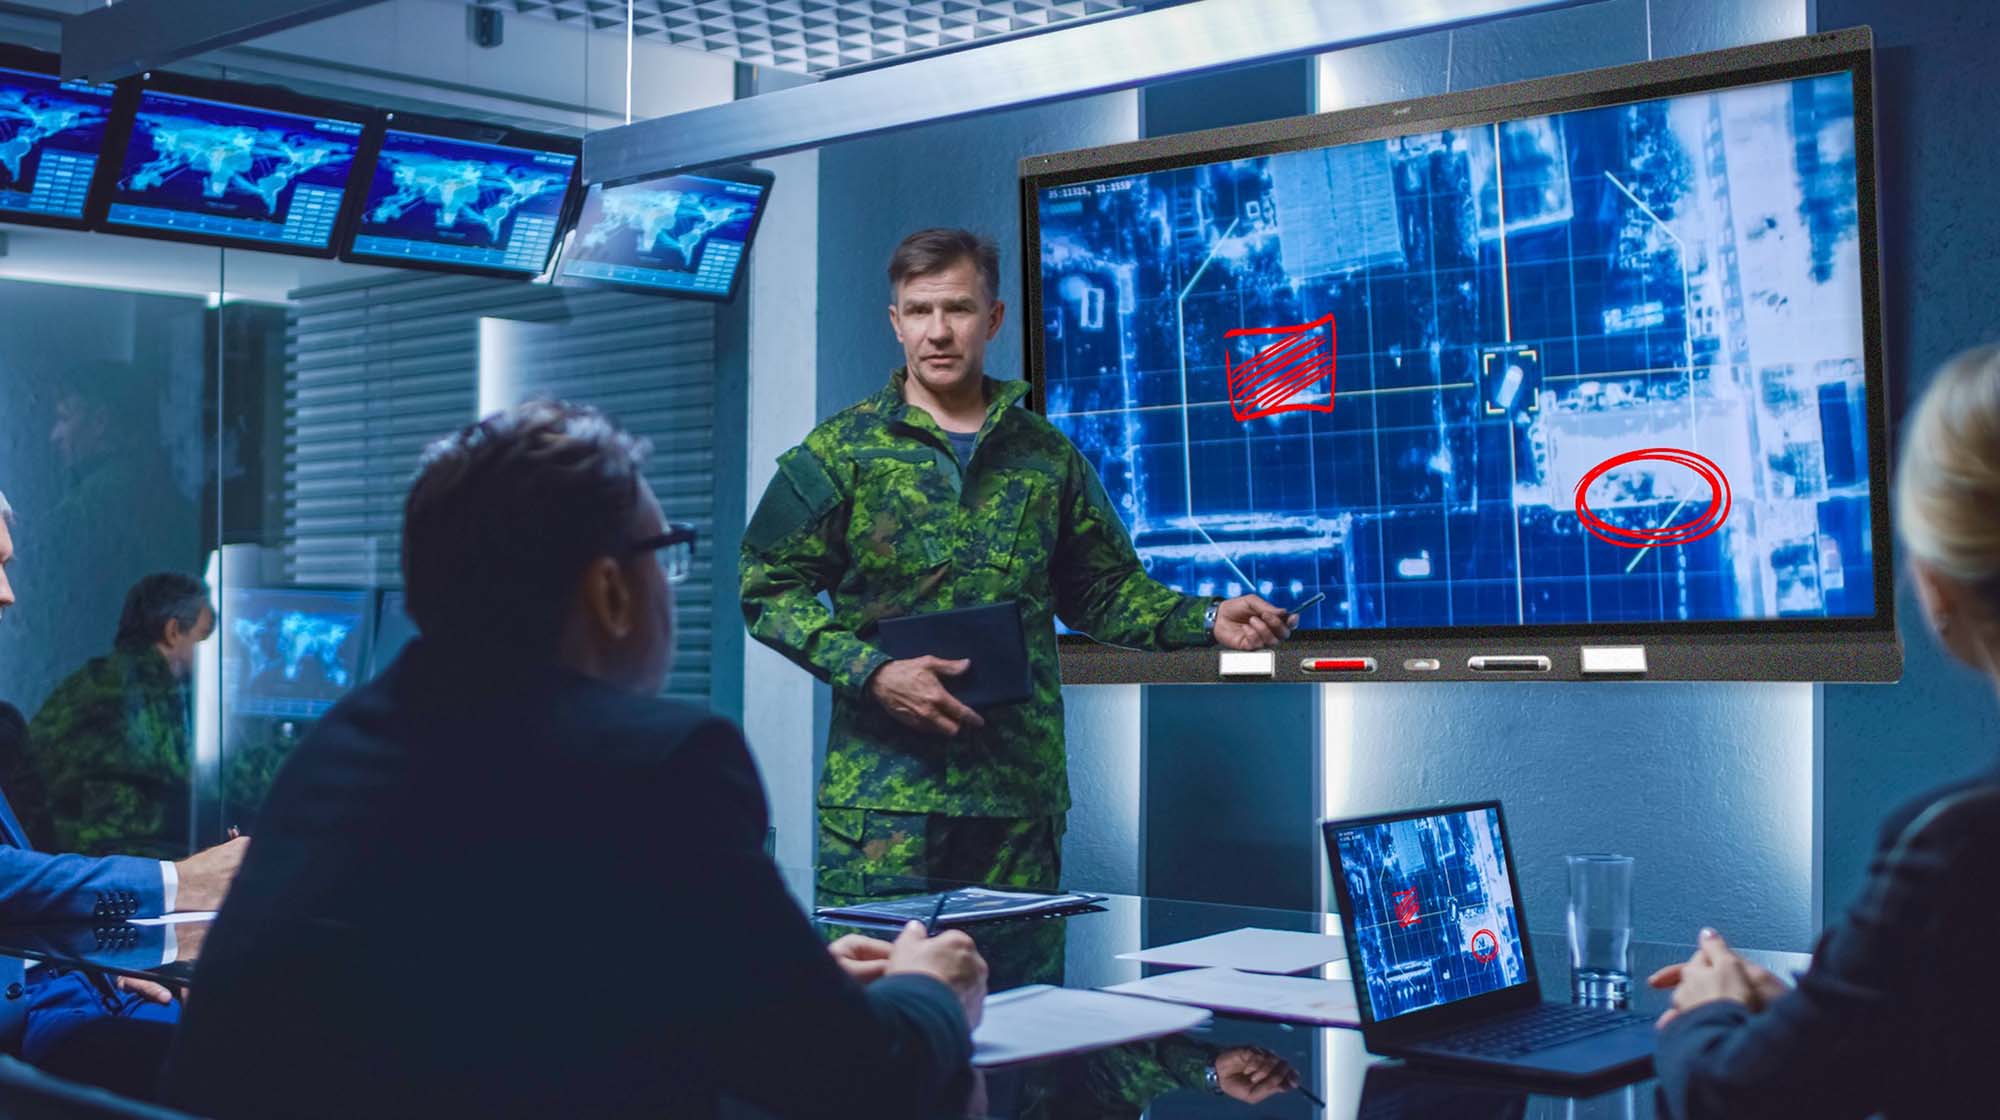 Military officer giving a presentation using the SMART board with marked satellite images in a high-tech briefing room.